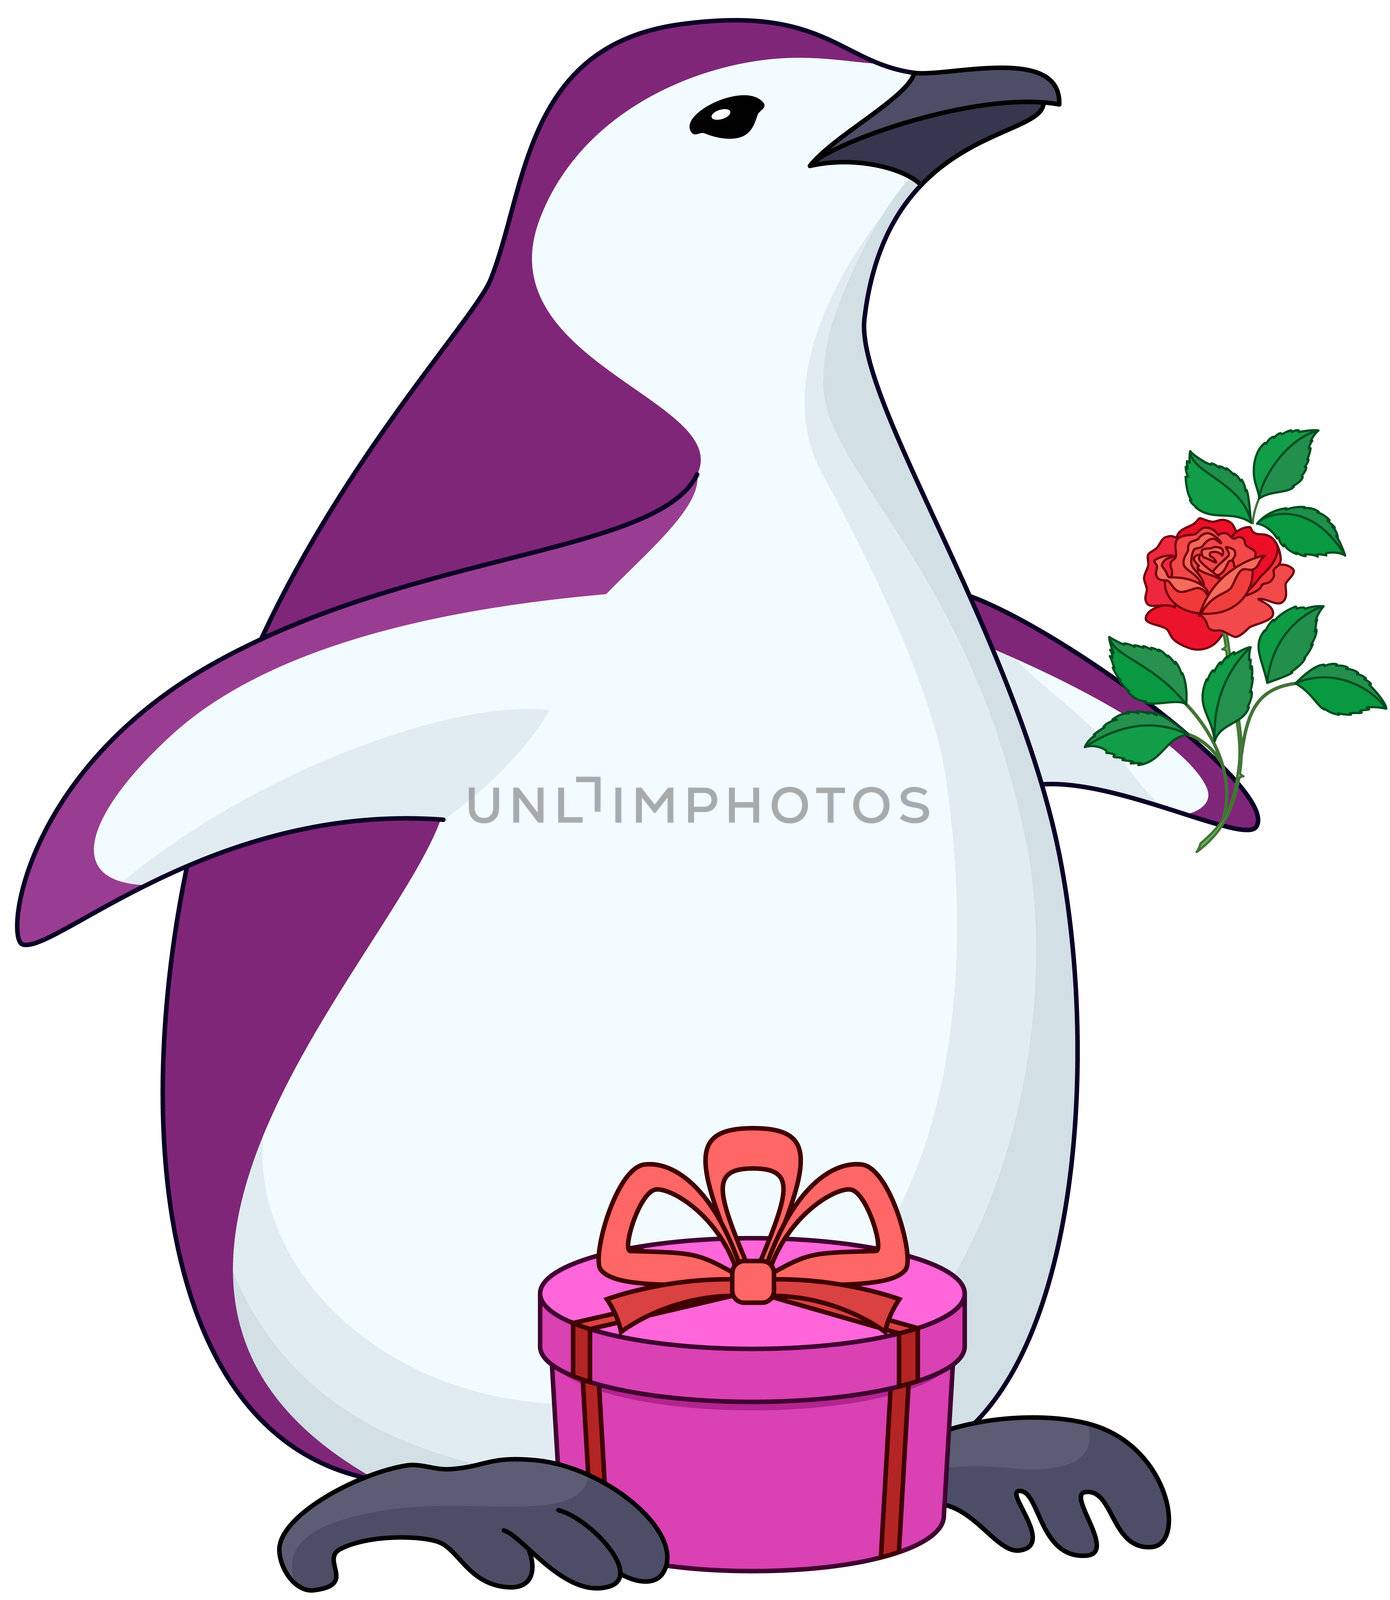 Antarctic penguin with gift box and rose flower